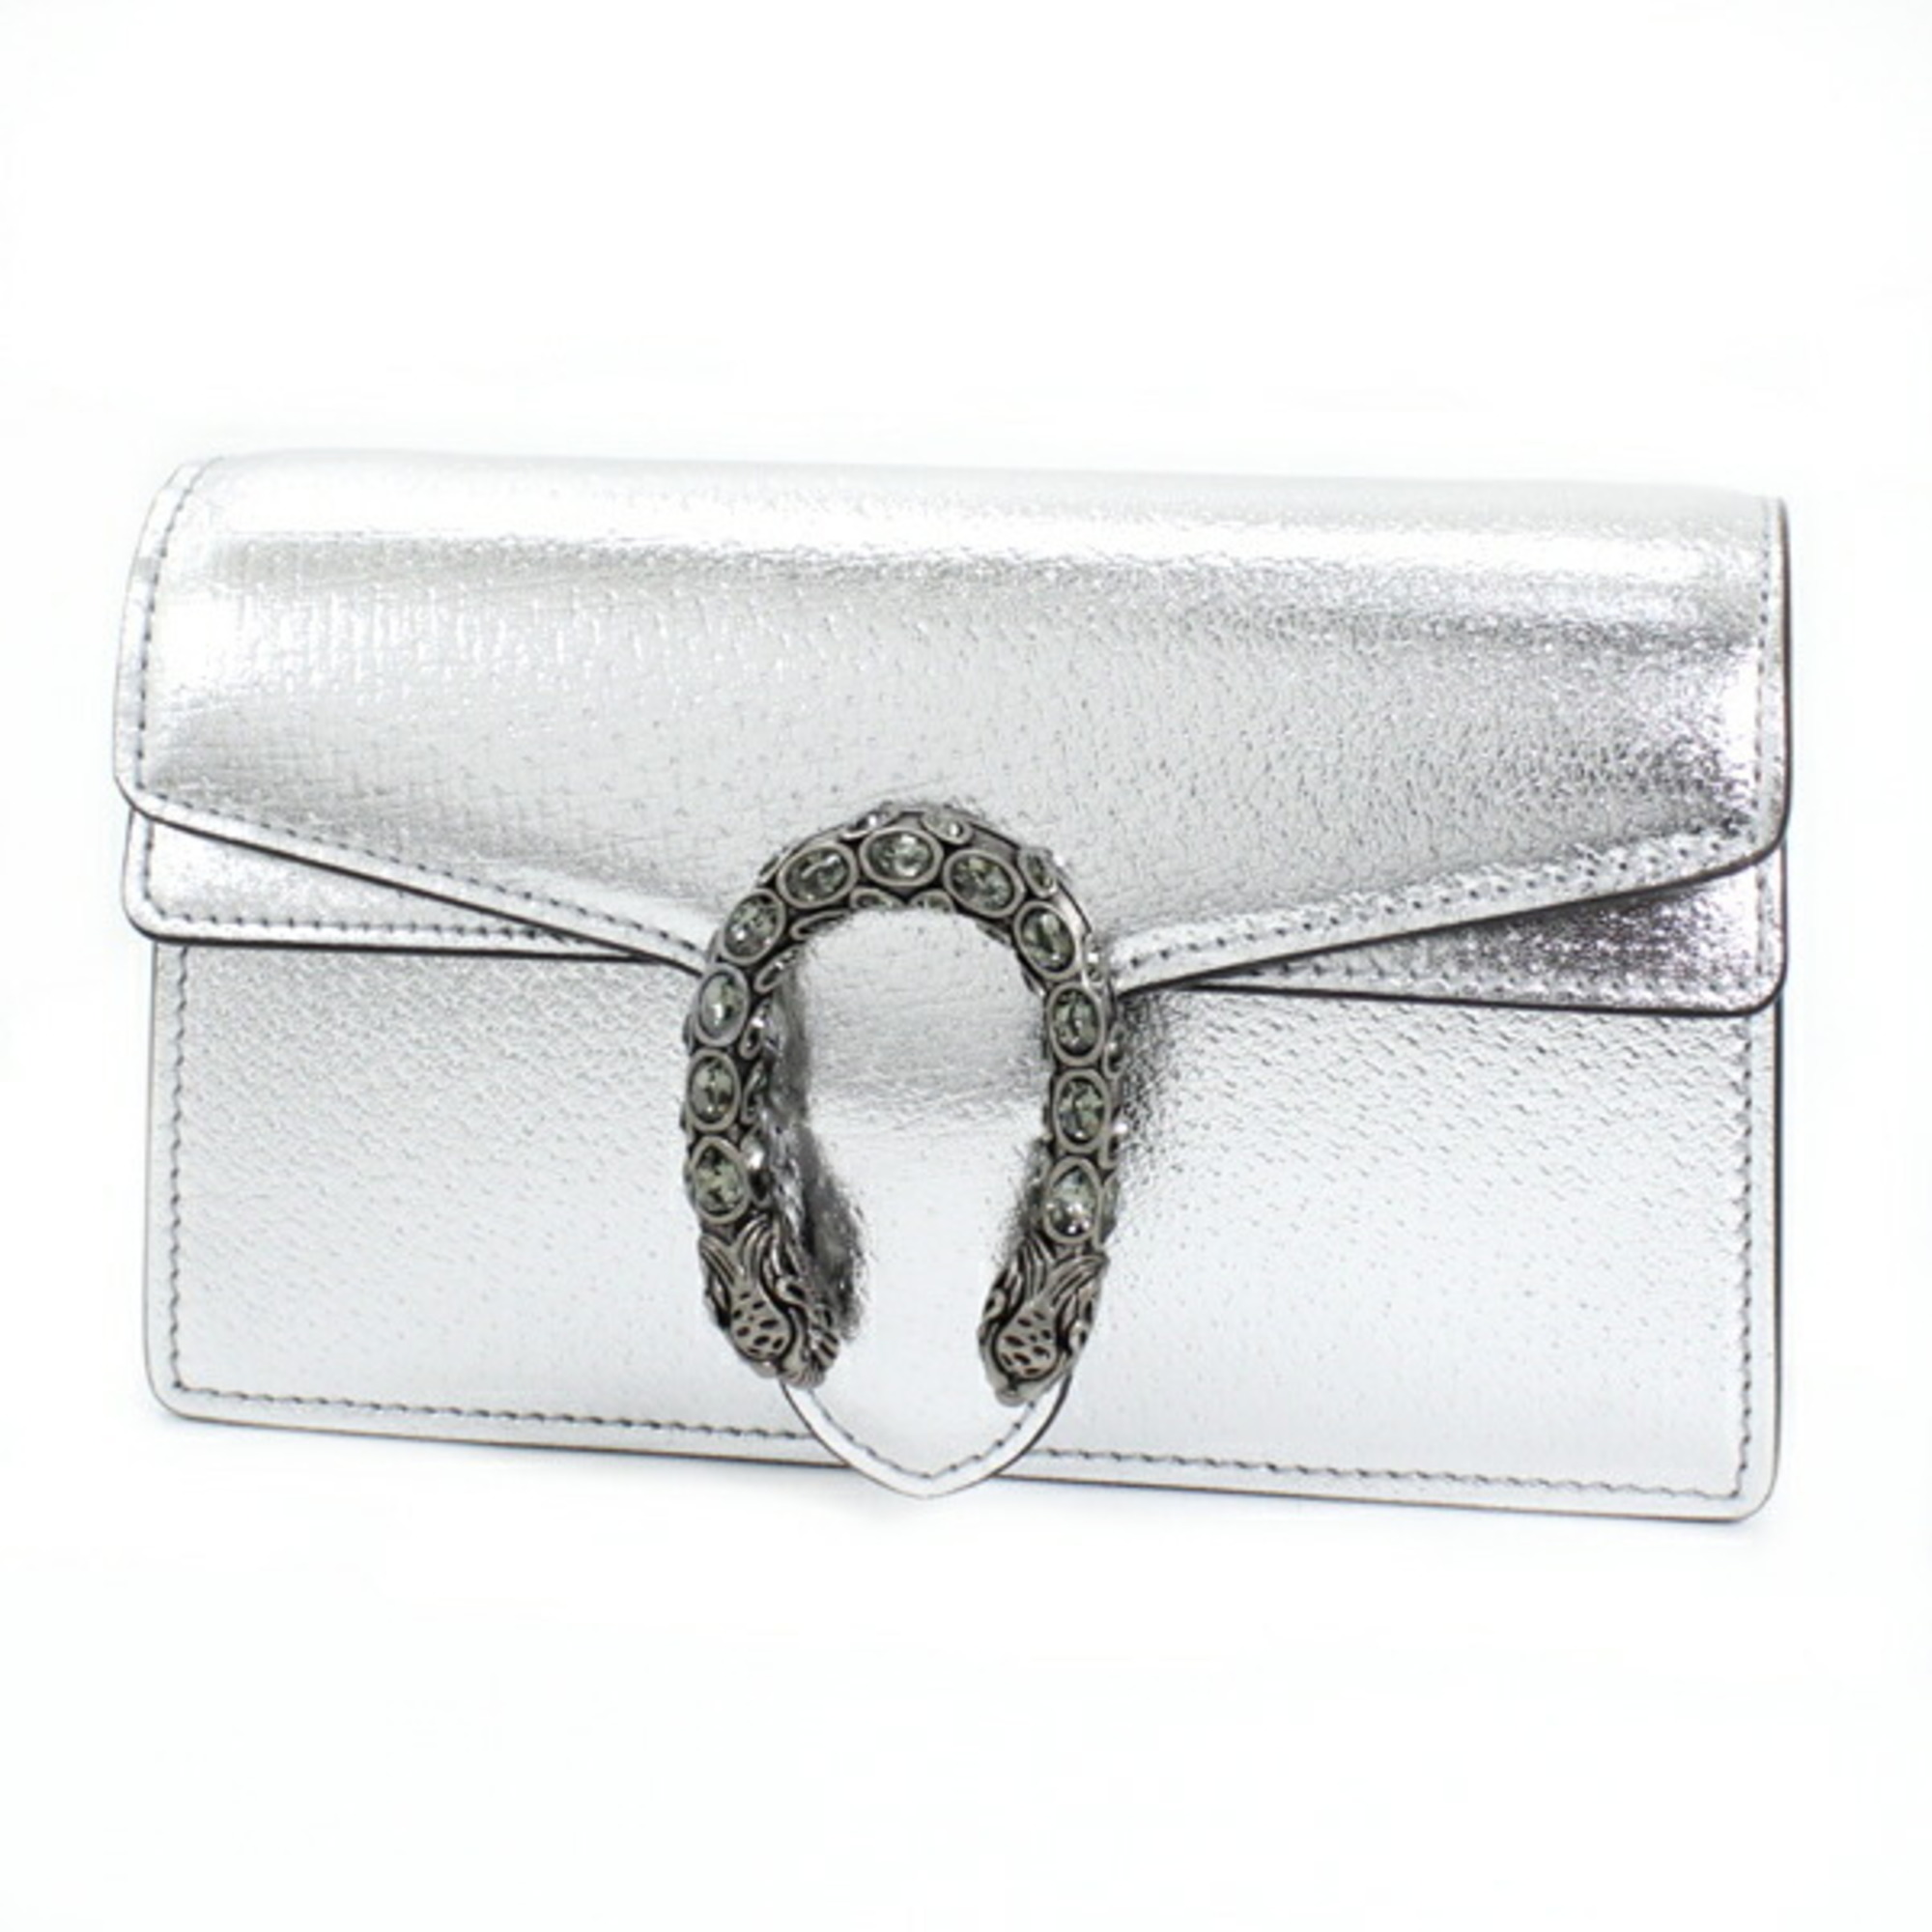 Gucci Chain Shoulder Bag Super Duonissos Silver Leather 476432 GUCCI Ladies Included T3883-r